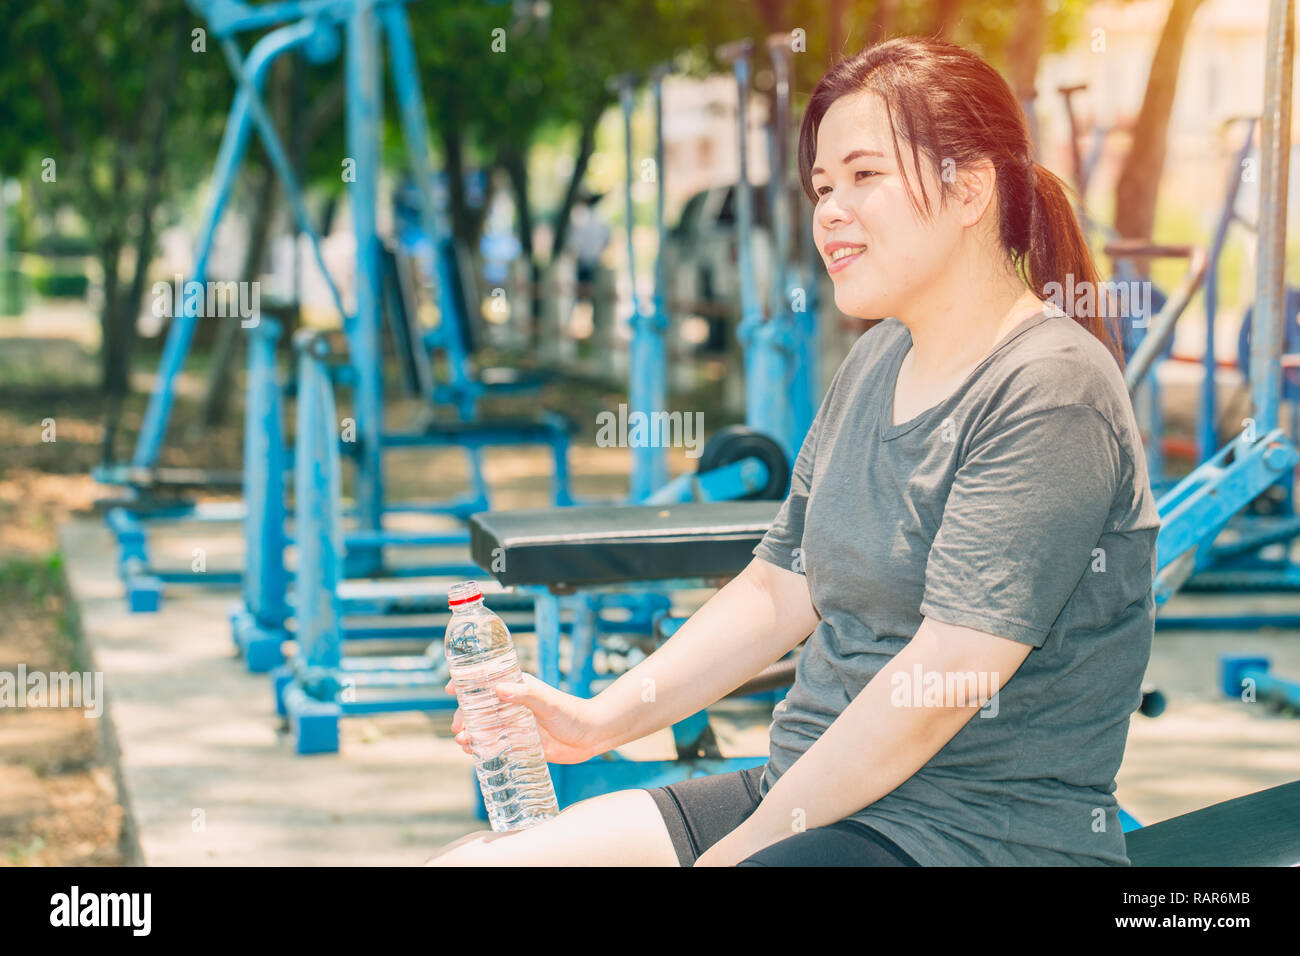 overweight woman drinking water after workout at outdoor park. Stock Photo